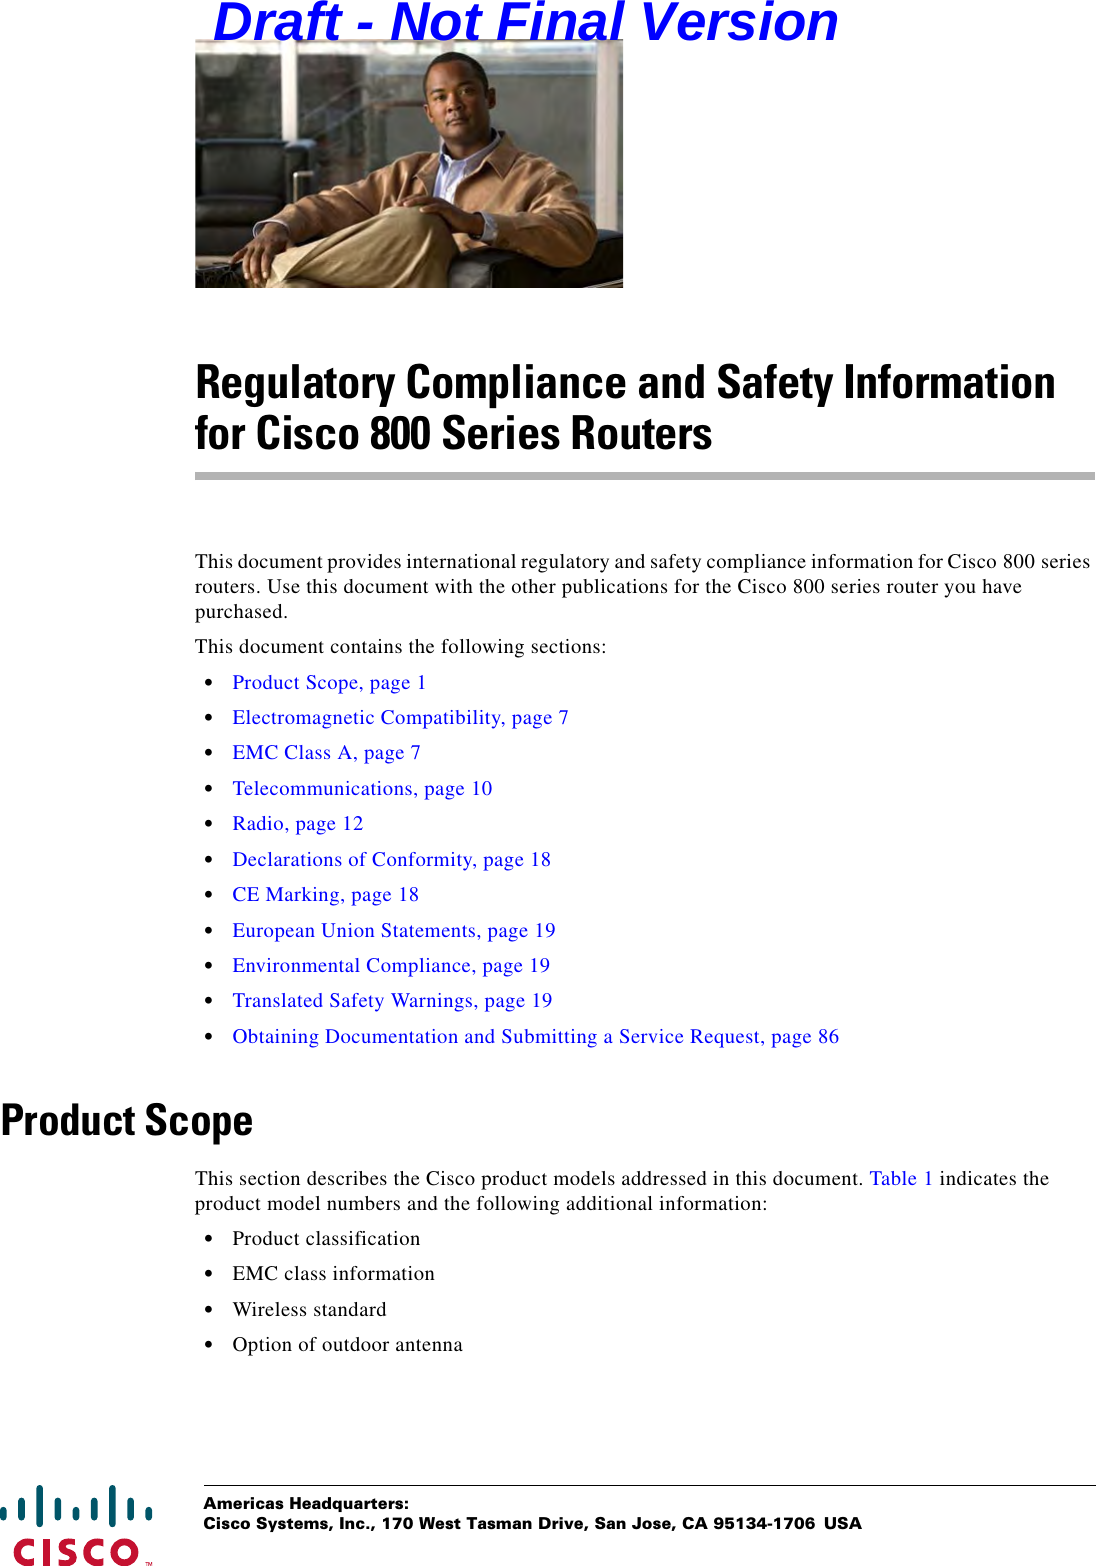 Americas Headquarters:Cisco Systems, Inc., 170 West Tasman Drive, San Jose, CA 95134-1706 USARegulatory Compliance and Safety Information for Cisco 800 Series RoutersThis document provides international regulatory and safety compliance information for Cisco 800 series routers. Use this document with the other publications for the Cisco 800 series router you have purchased.This document contains the following sections:  •Product Scope, page 1  •Electromagnetic Compatibility, page 7  •EMC Class A, page 7  •Telecommunications, page 10  •Radio, page 12  •Declarations of Conformity, page 18  •CE Marking, page 18  •European Union Statements, page 19  •Environmental Compliance, page 19  •Translated Safety Warnings, page 19  •Obtaining Documentation and Submitting a Service Request, page 86Product ScopeThis section describes the Cisco product models addressed in this document. Table 1 indicates the product model numbers and the following additional information:  •Product classification  •EMC class information  •Wireless standard  •Option of outdoor antennaDraft - Not Final Version